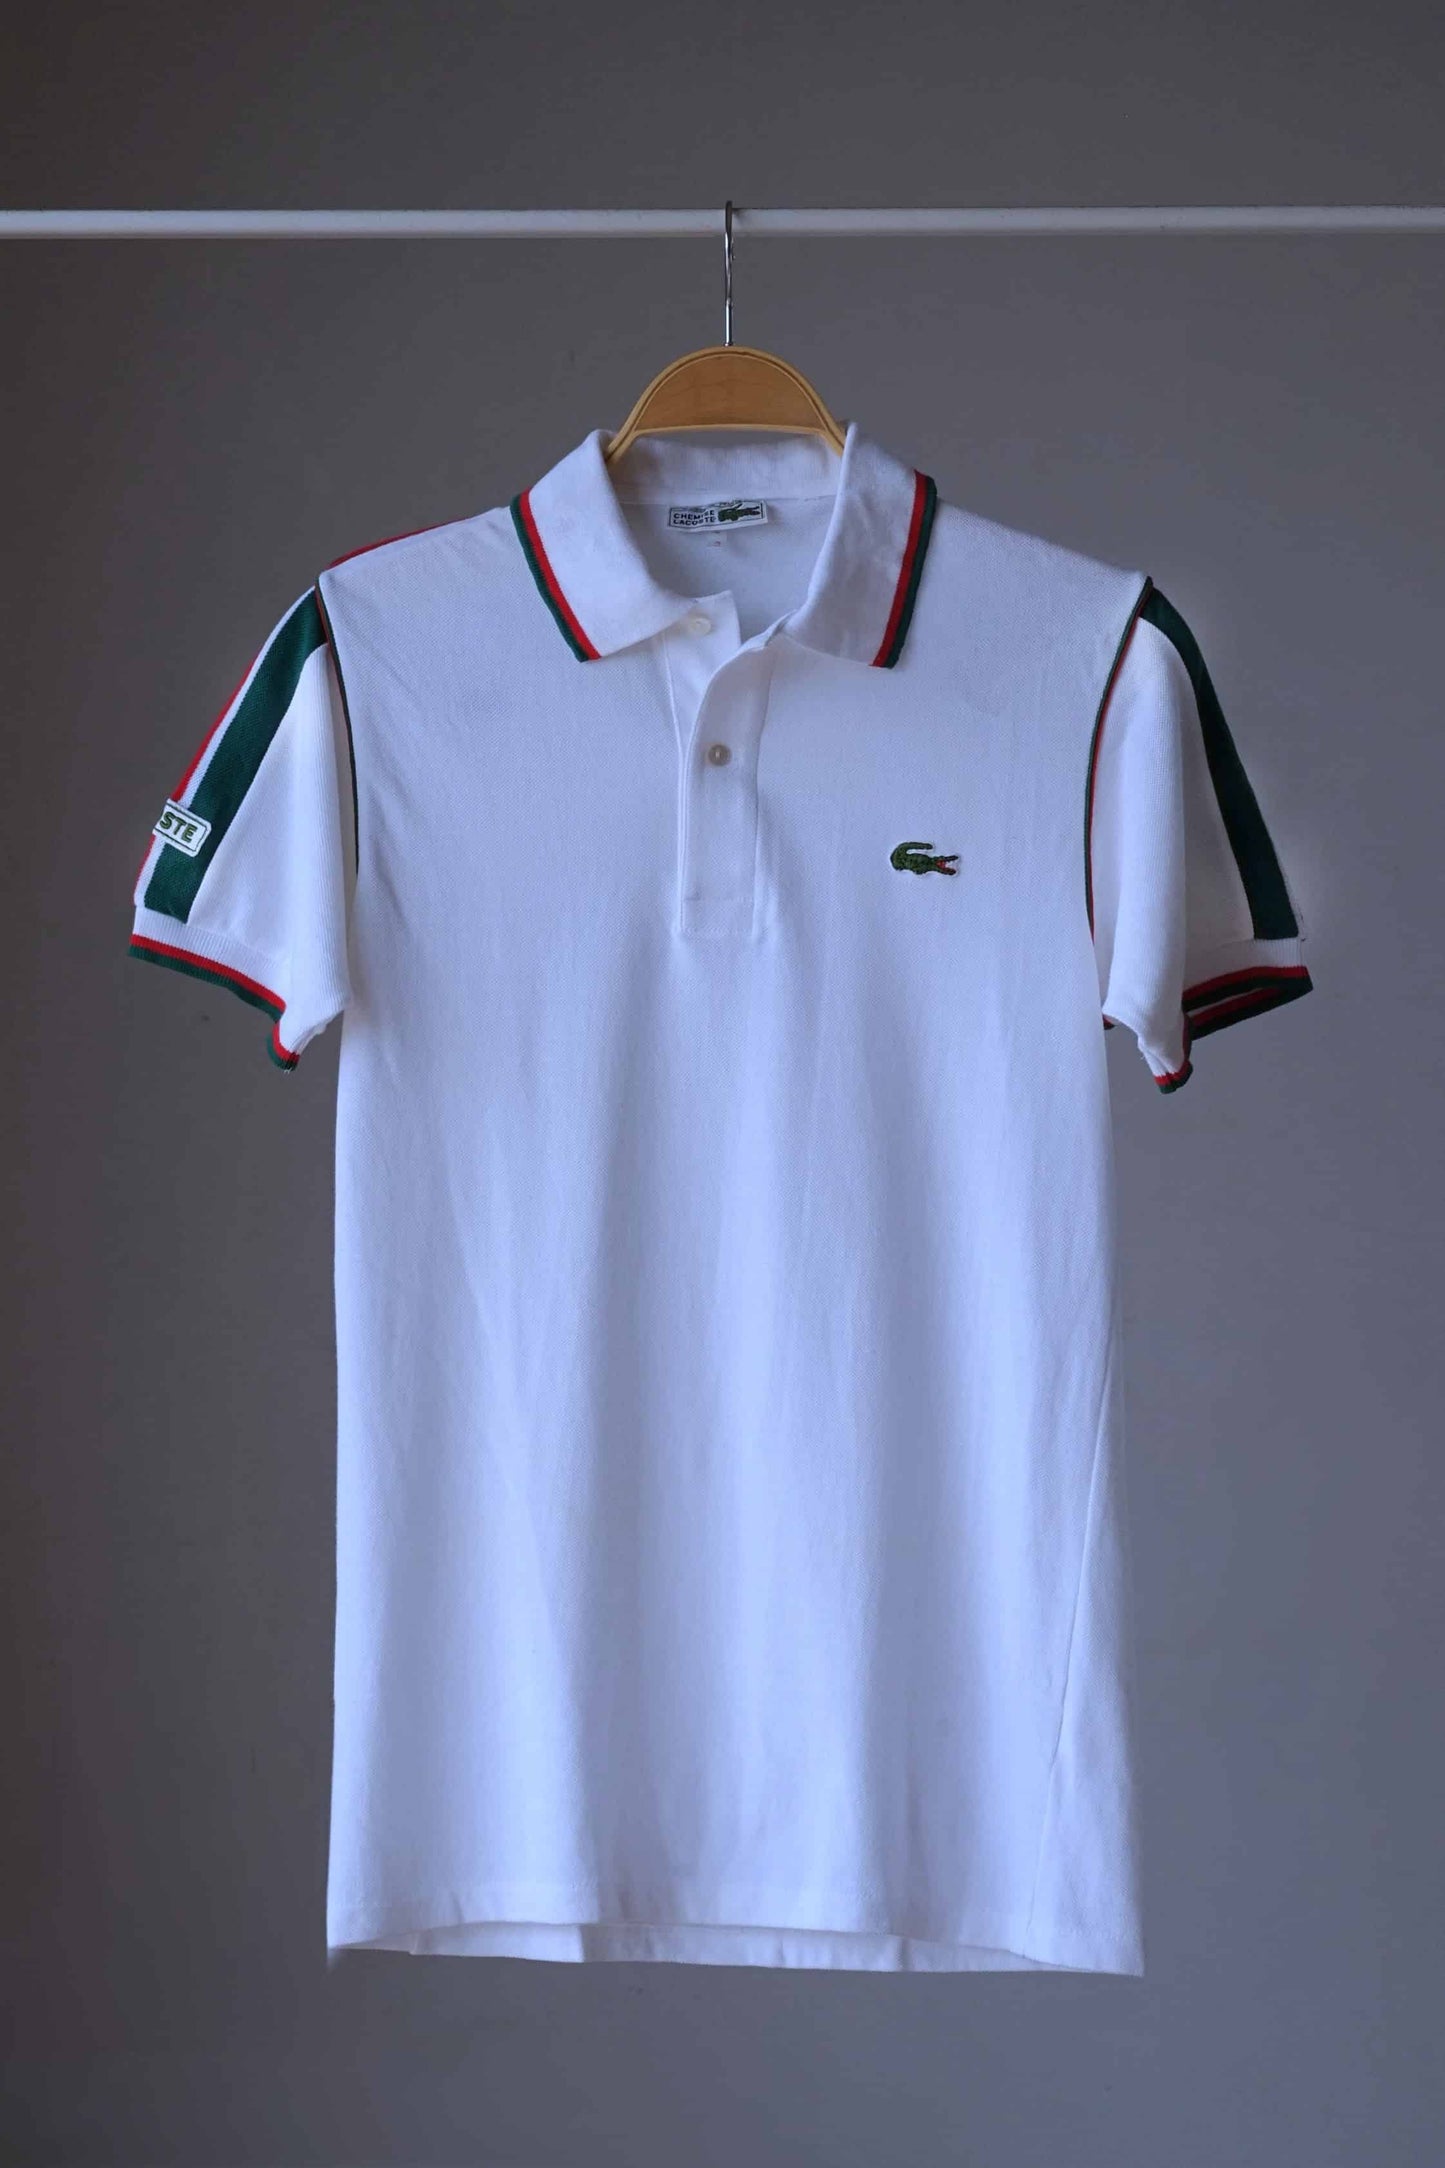 Lacoste vintage shirt in white and green stripes on hanger